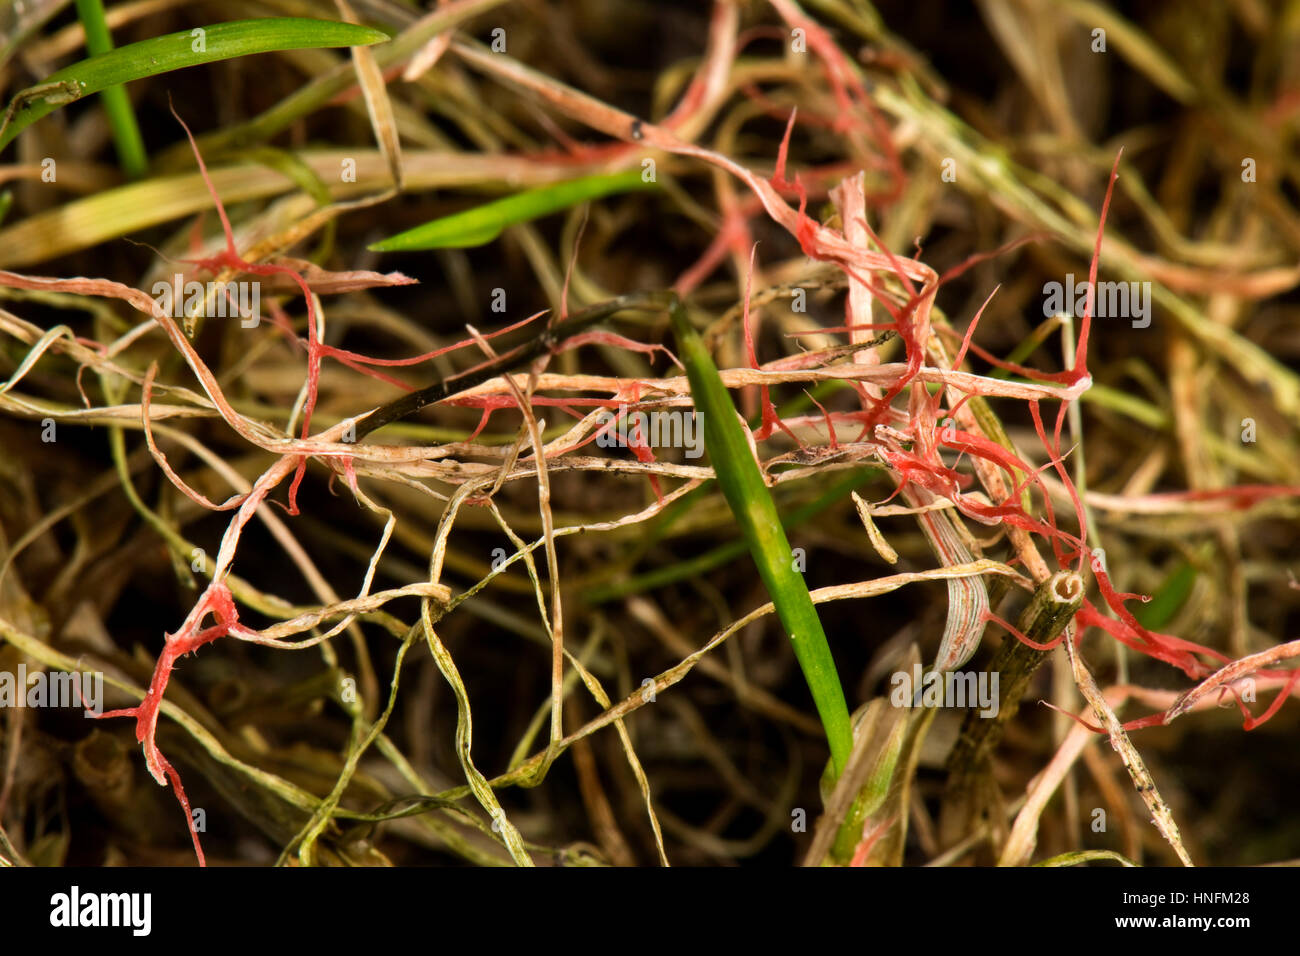 Red thread, Laetisaria fuciformis, damage and stromata from the disease on lawn grass Stock Photo